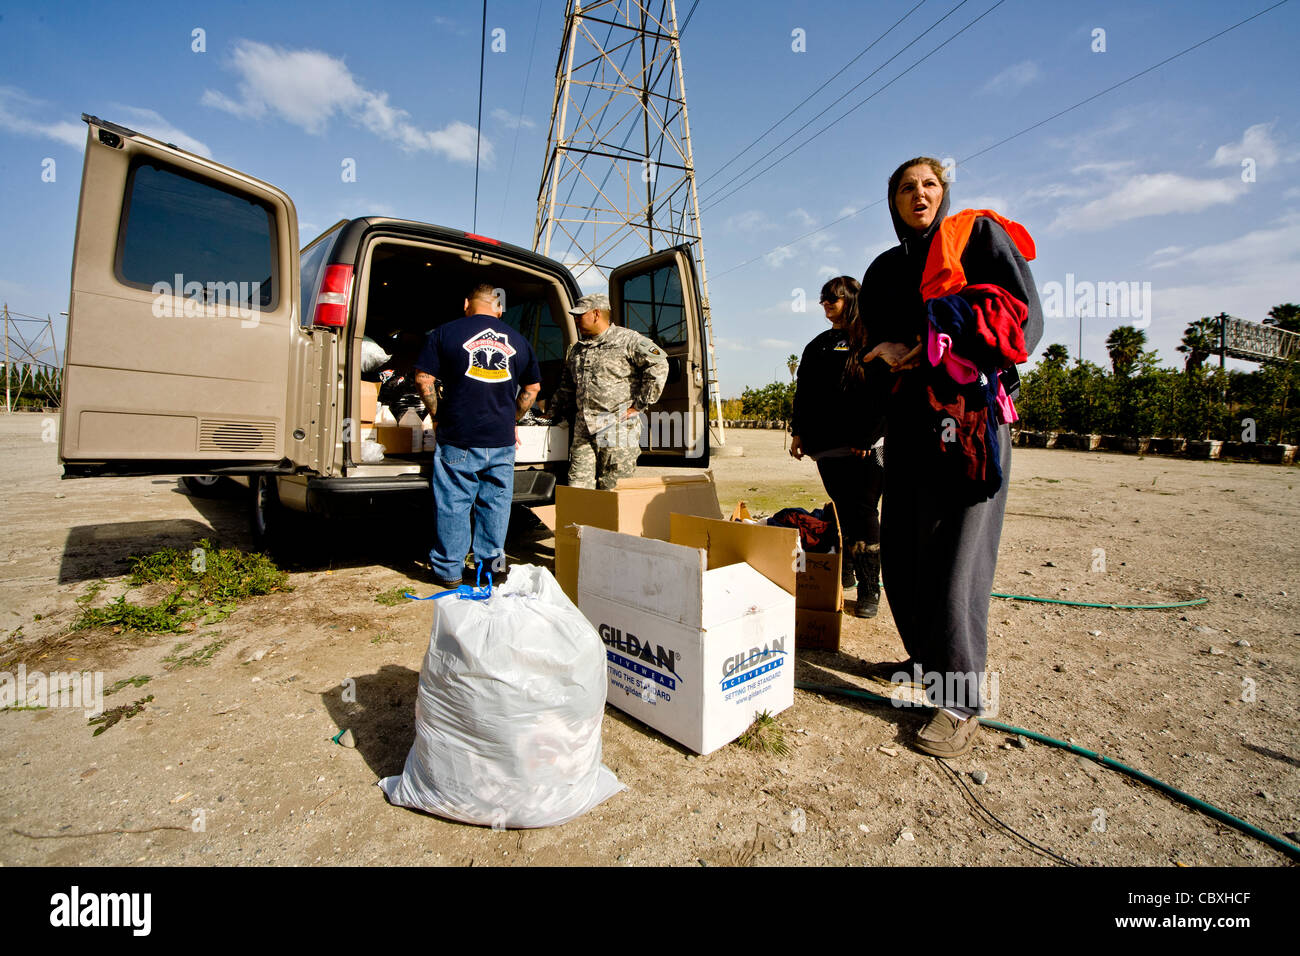 Volunteers from the charitable outreach program Vet Hunters unload food and clothing from an Army truck for homeless veterans. Stock Photo